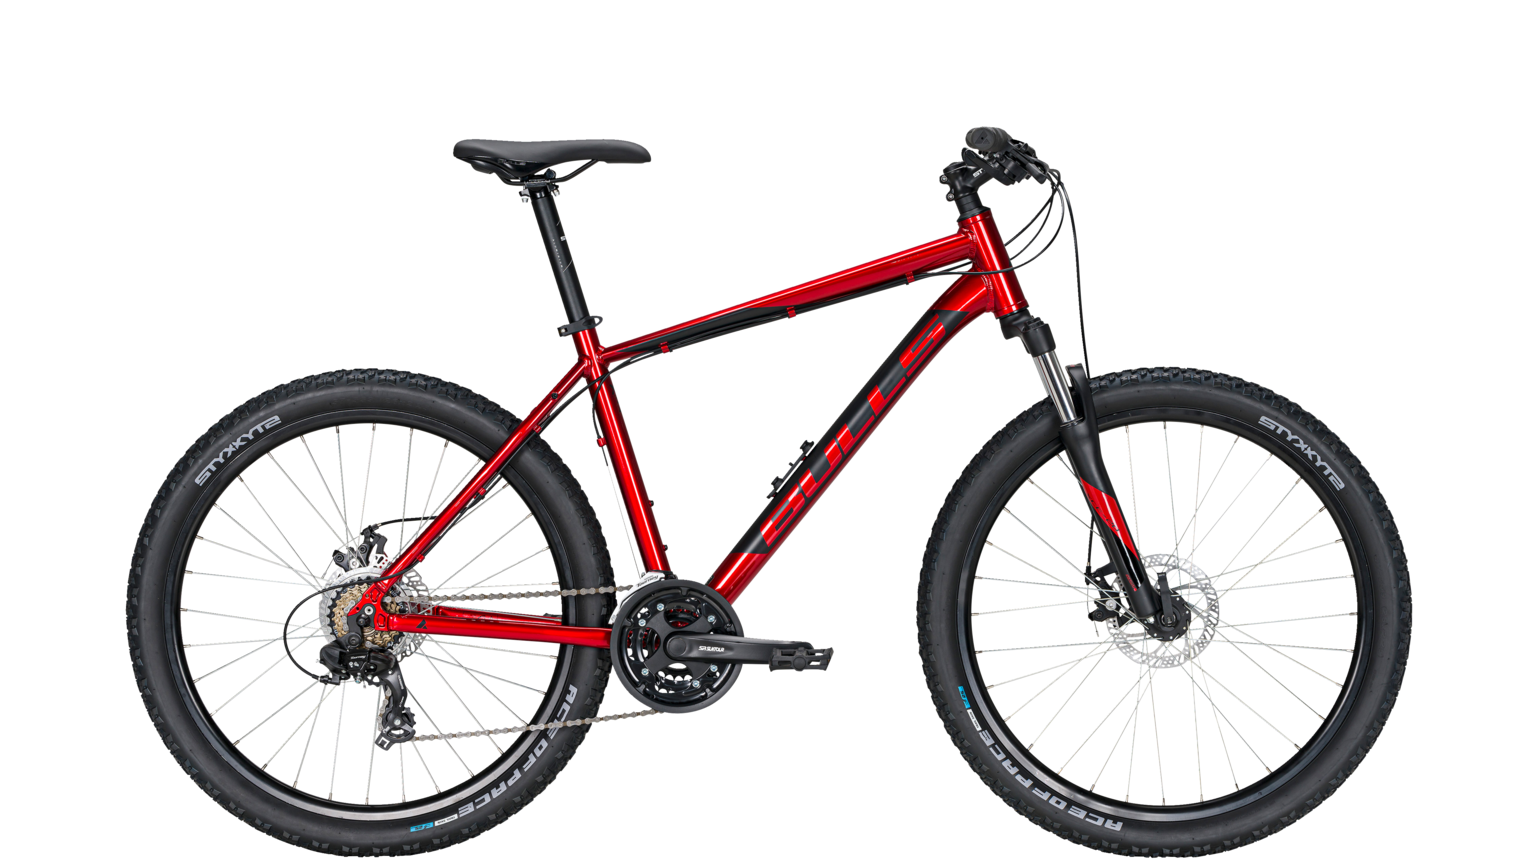 Bulls Wildtail 1 Disc 29 - 2021 chrome red